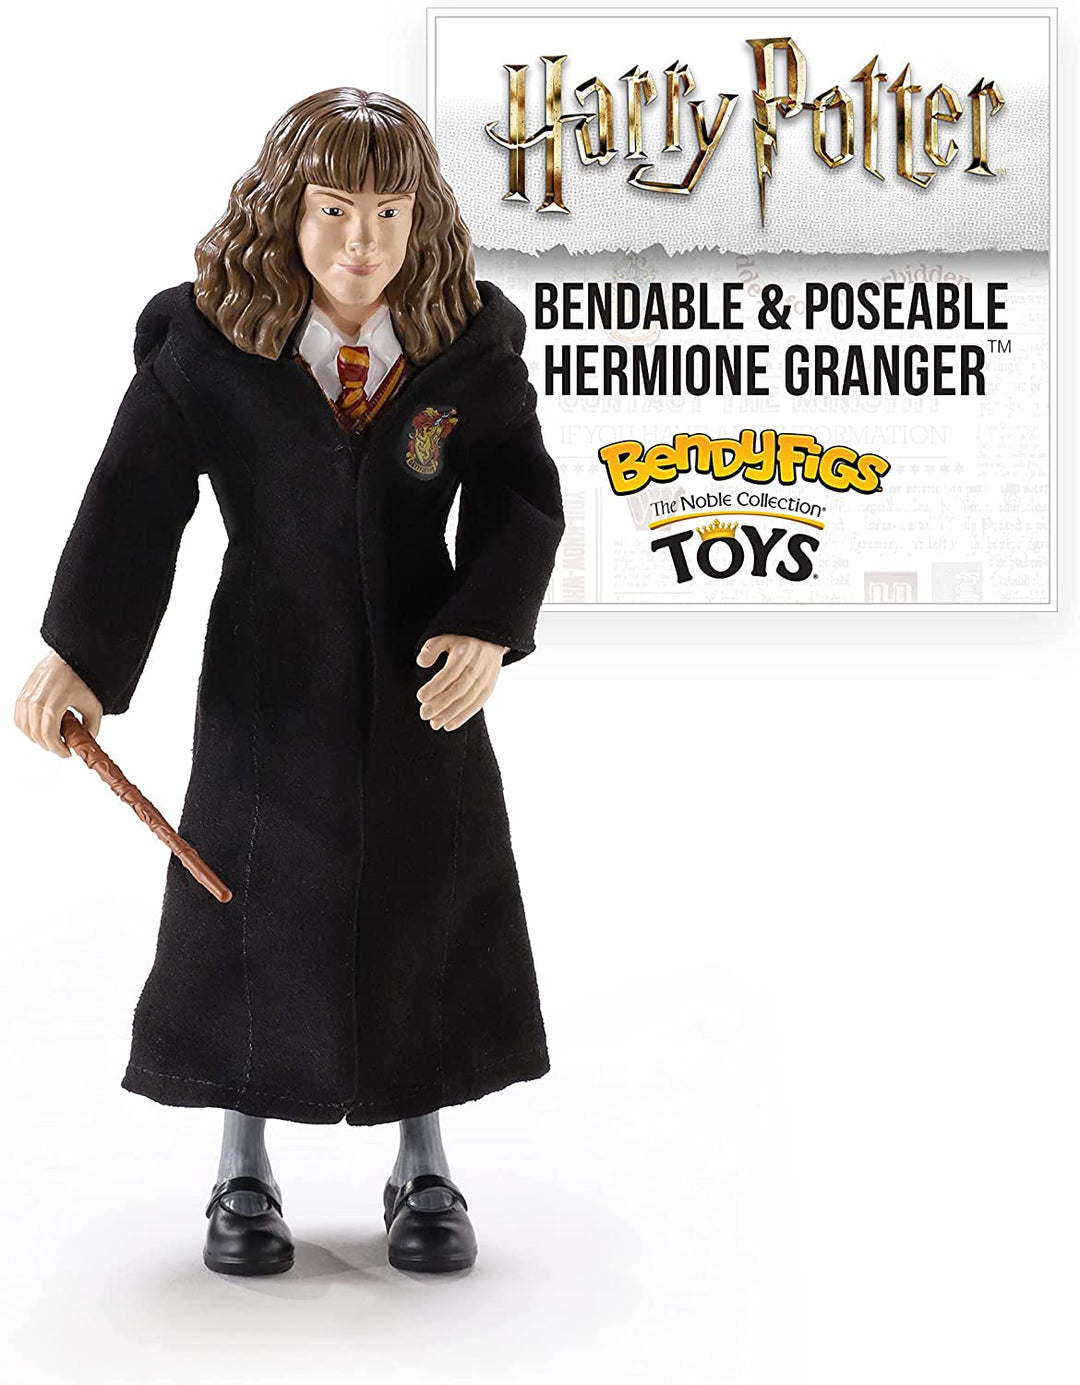 The Noble Collection Bendyfigs Hermione Granger Figure Officially Licensed 19cm (7.5 inch) Harry Potter Bendable Toy Posable Collectable Doll Figures With Stand - For Kids & Adults